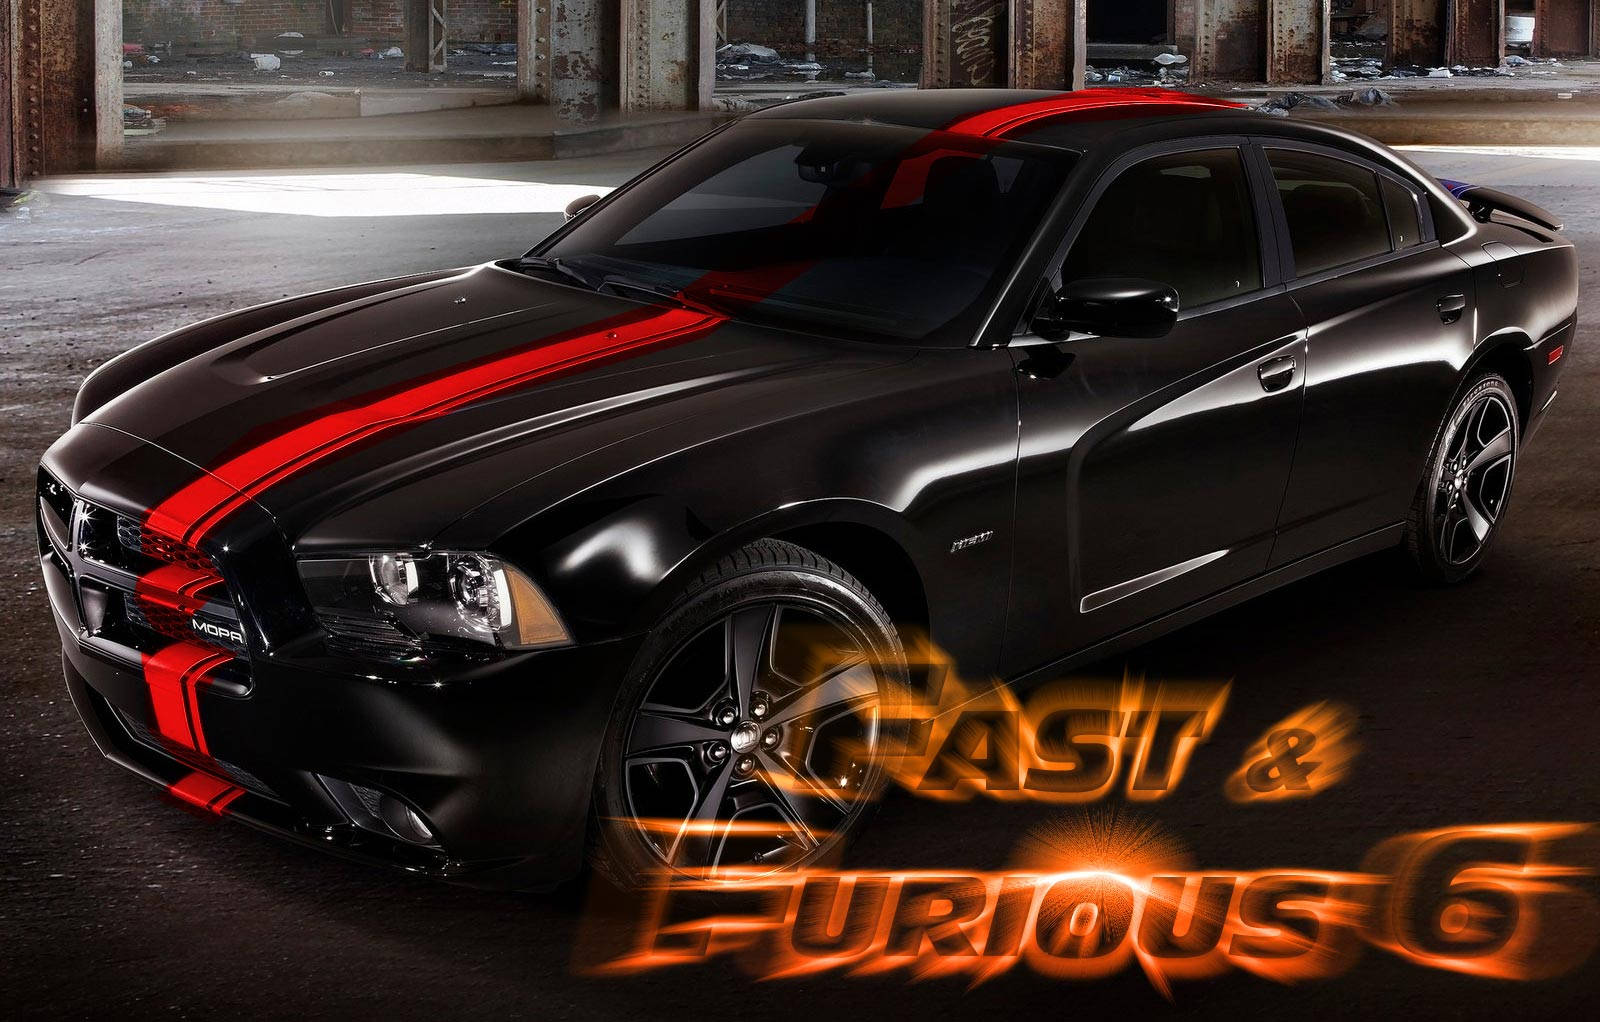 Fast And Furious 6 Cars Black And Red Fire Aesthetic